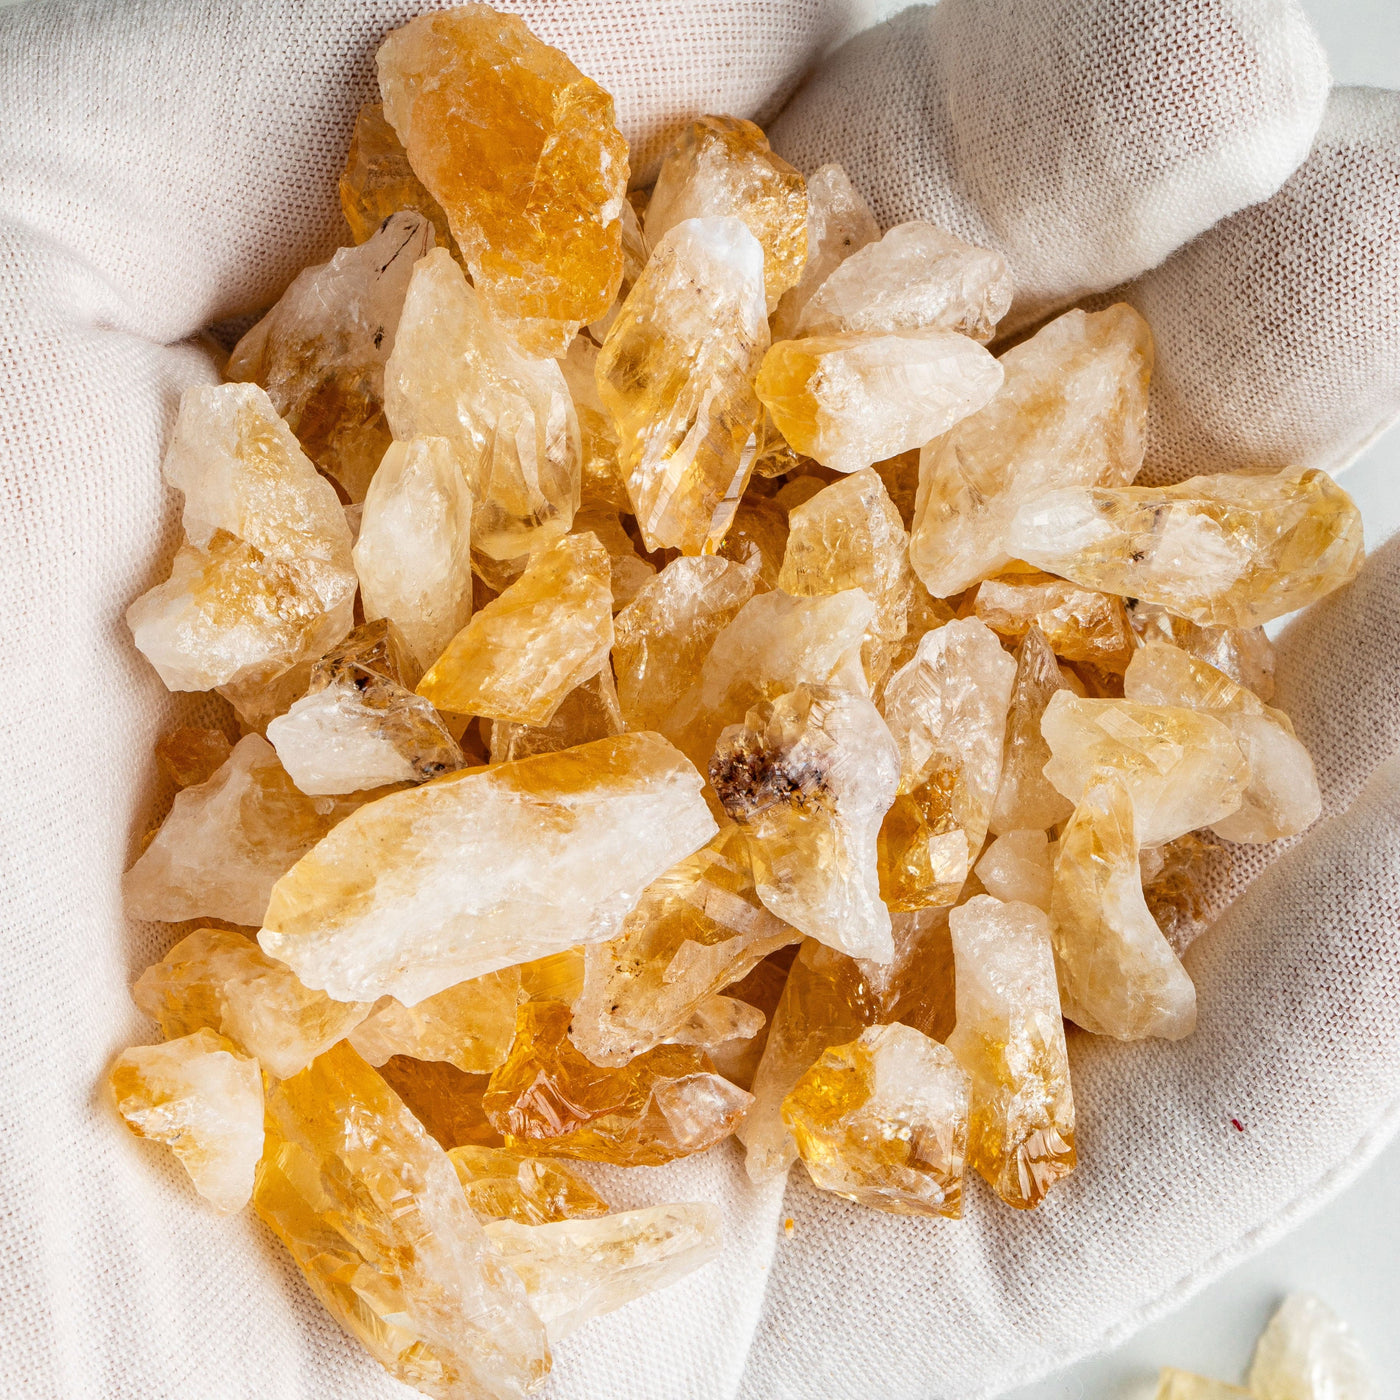 Citrine Stones - Golden Amethyst in a hand, approximately 150 grams, 1 bag